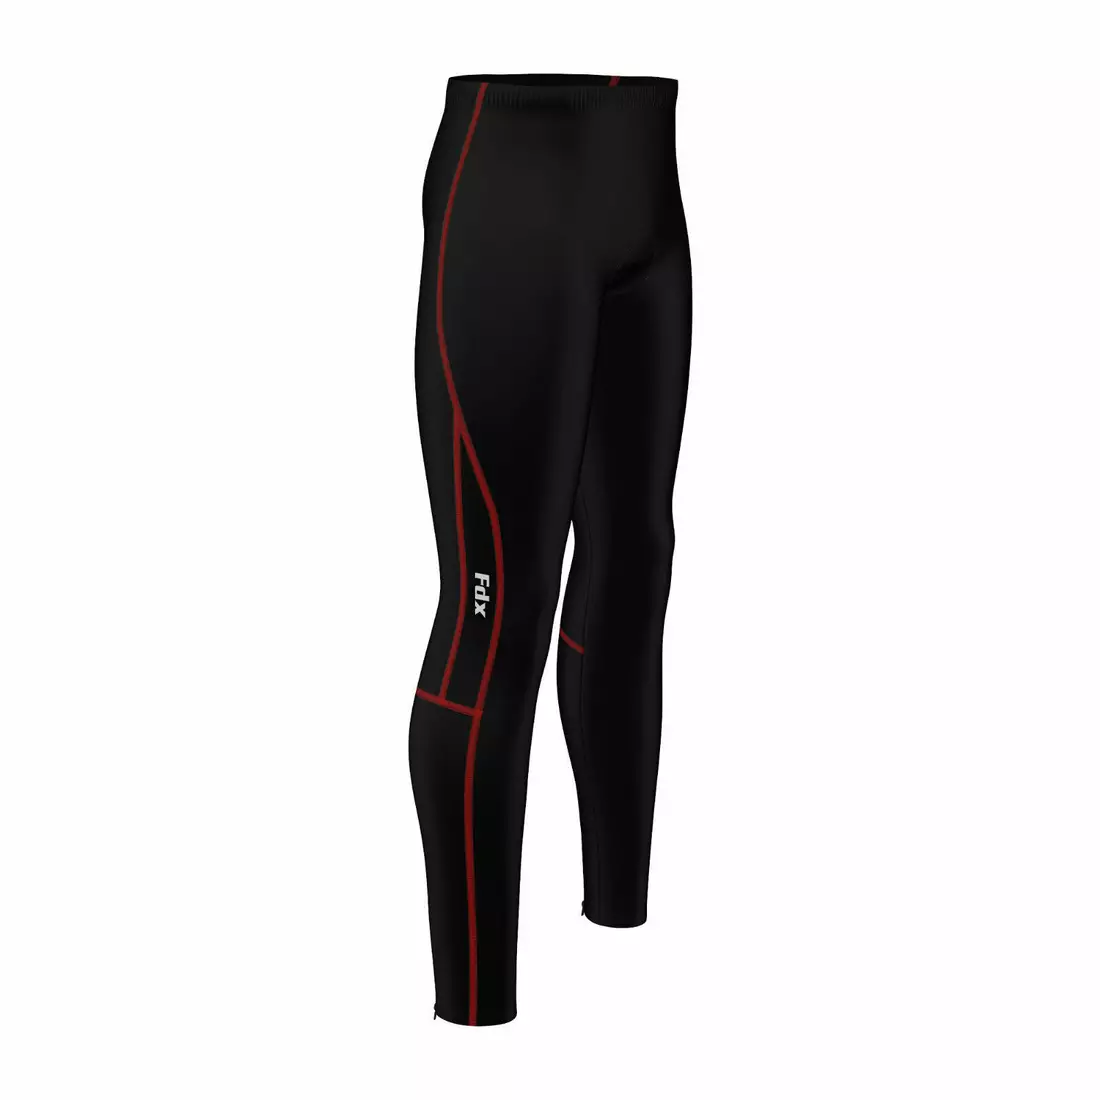 FDX 1830 cycling trousers, uninsulated. black-red stitching